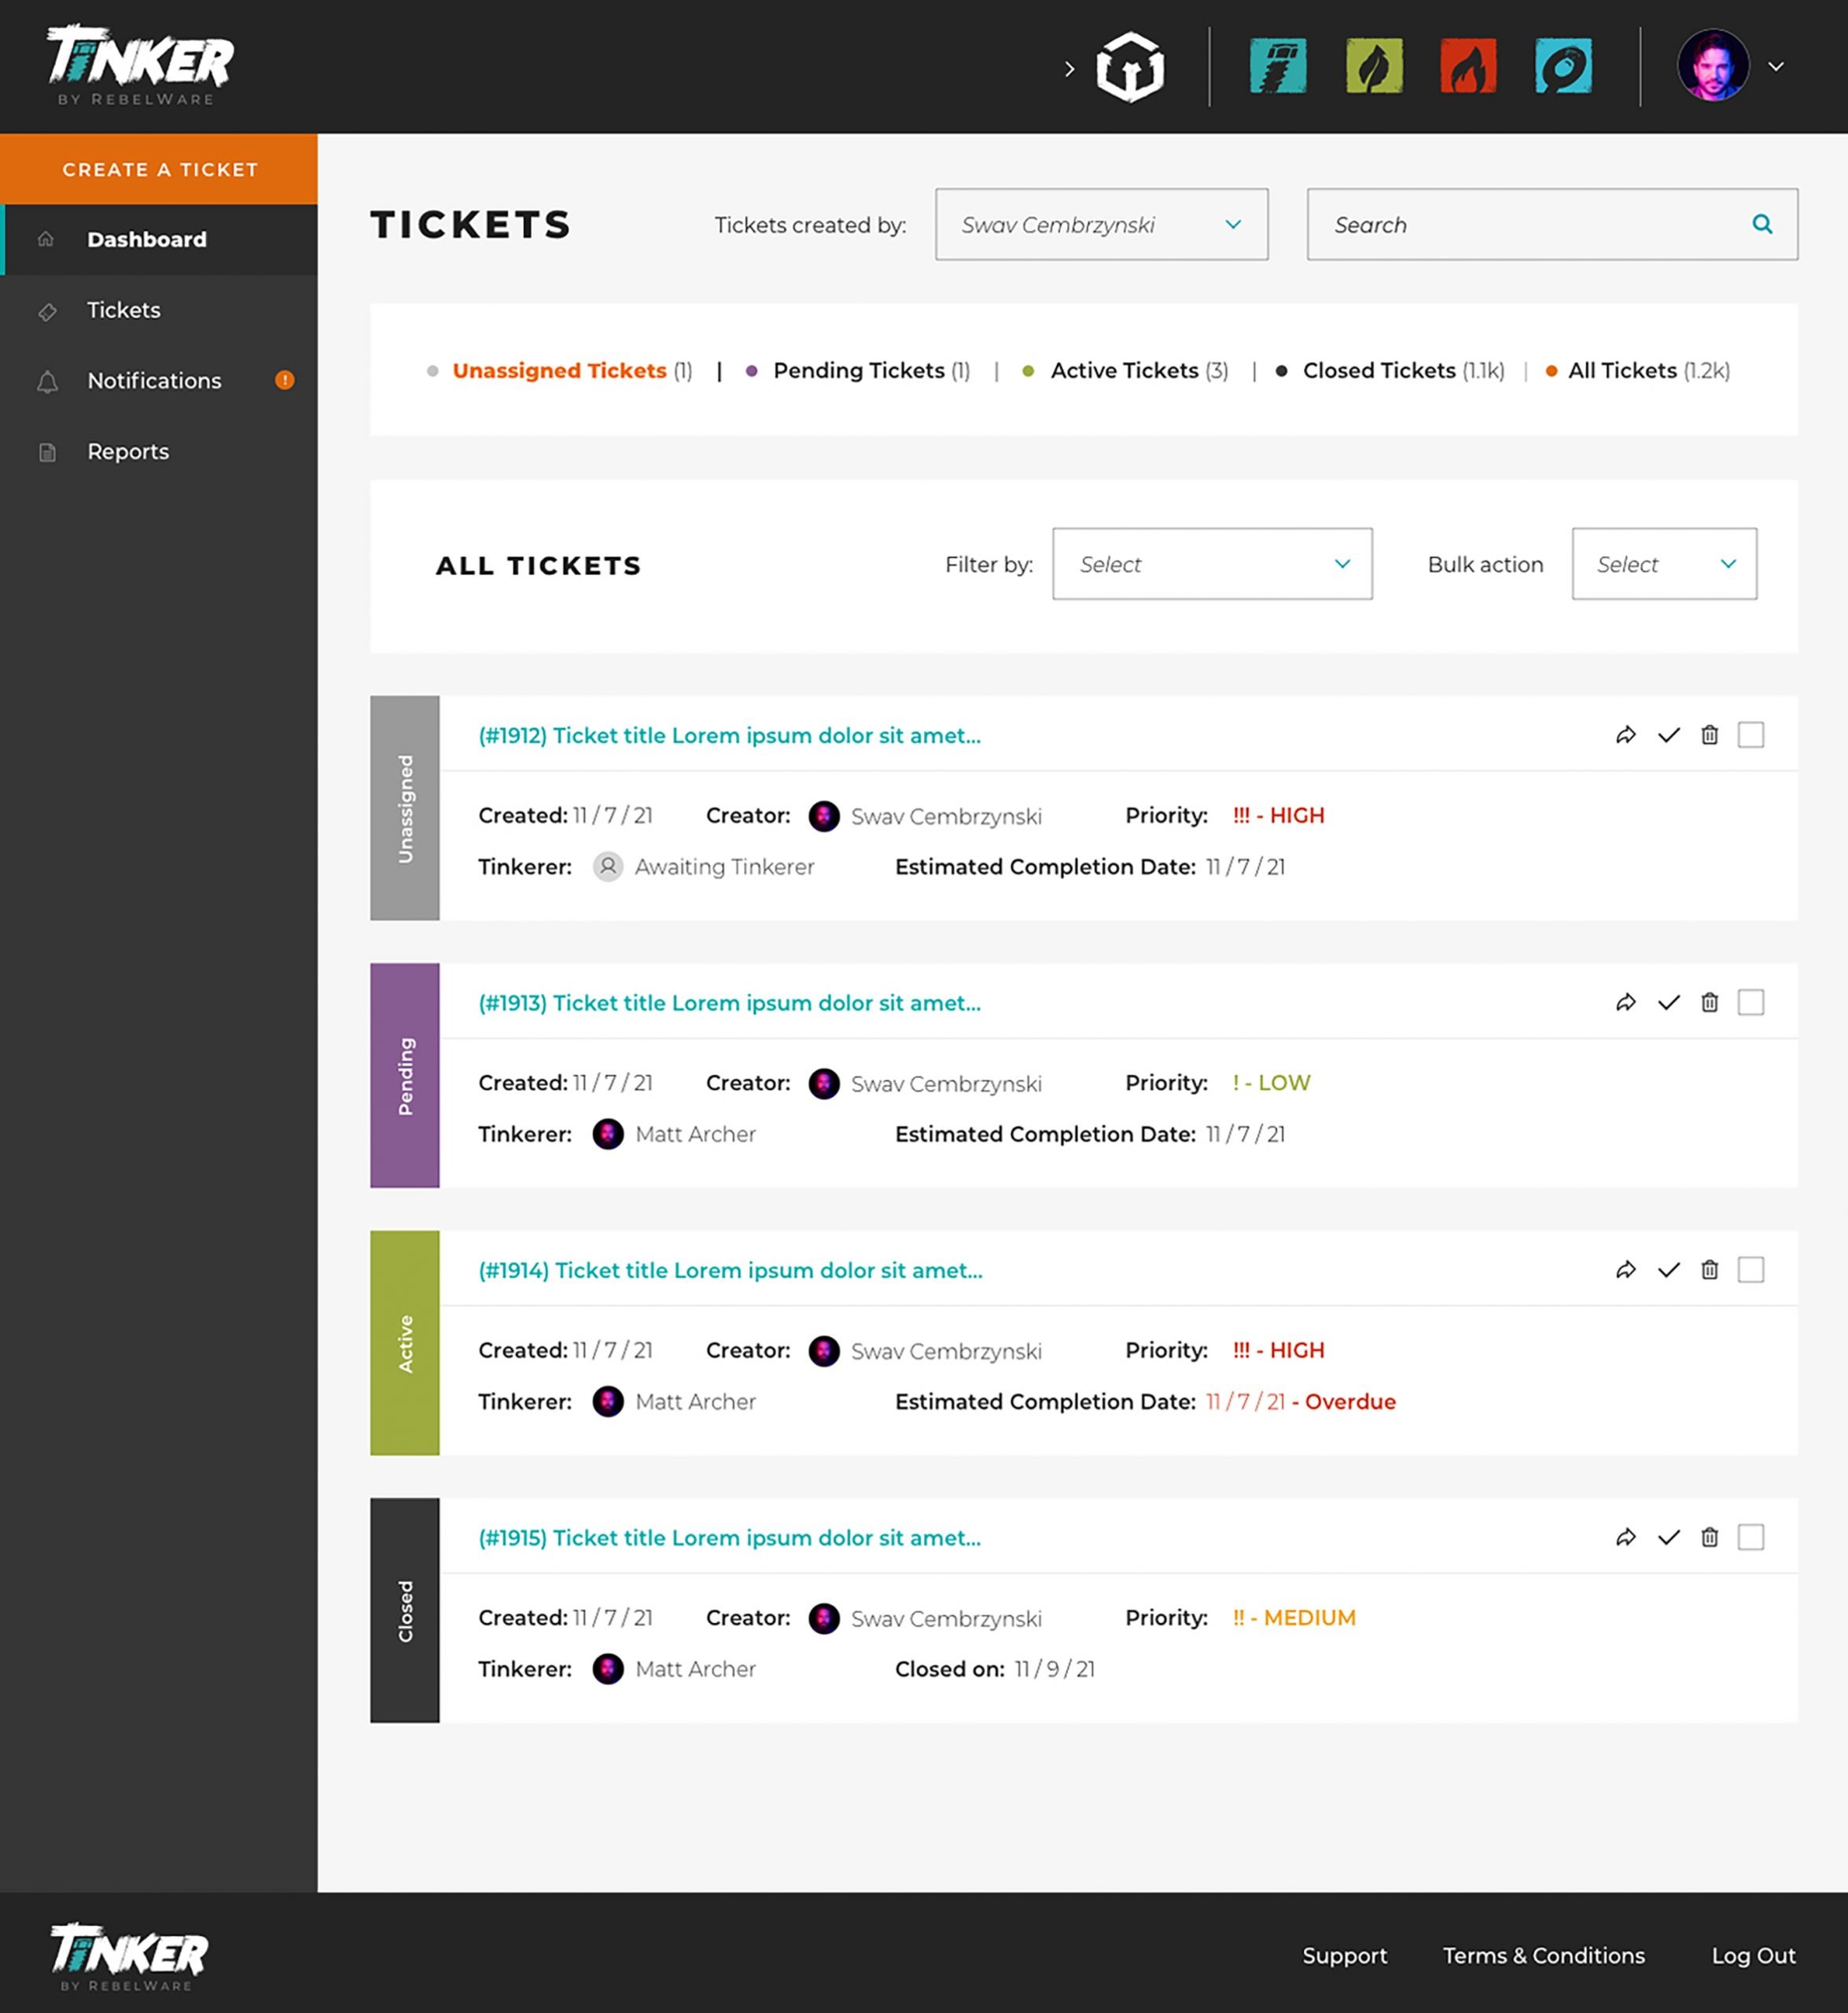 View of all tickets in Tinker